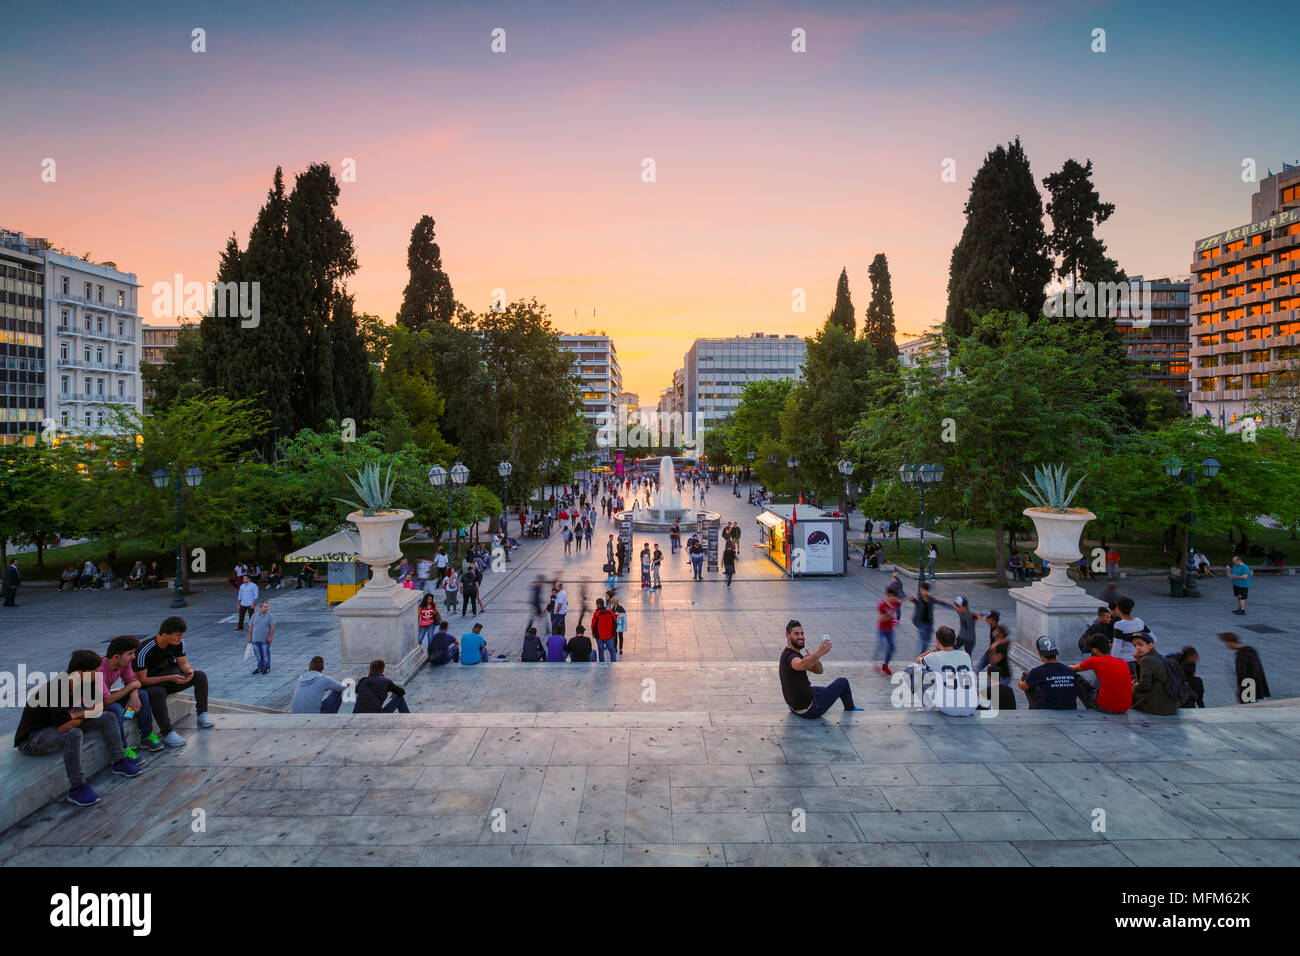 Athens, Greece - April 24, 2018: People hanging out in Syntagma square in  Athens on a warm evening Stock Photo - Alamy